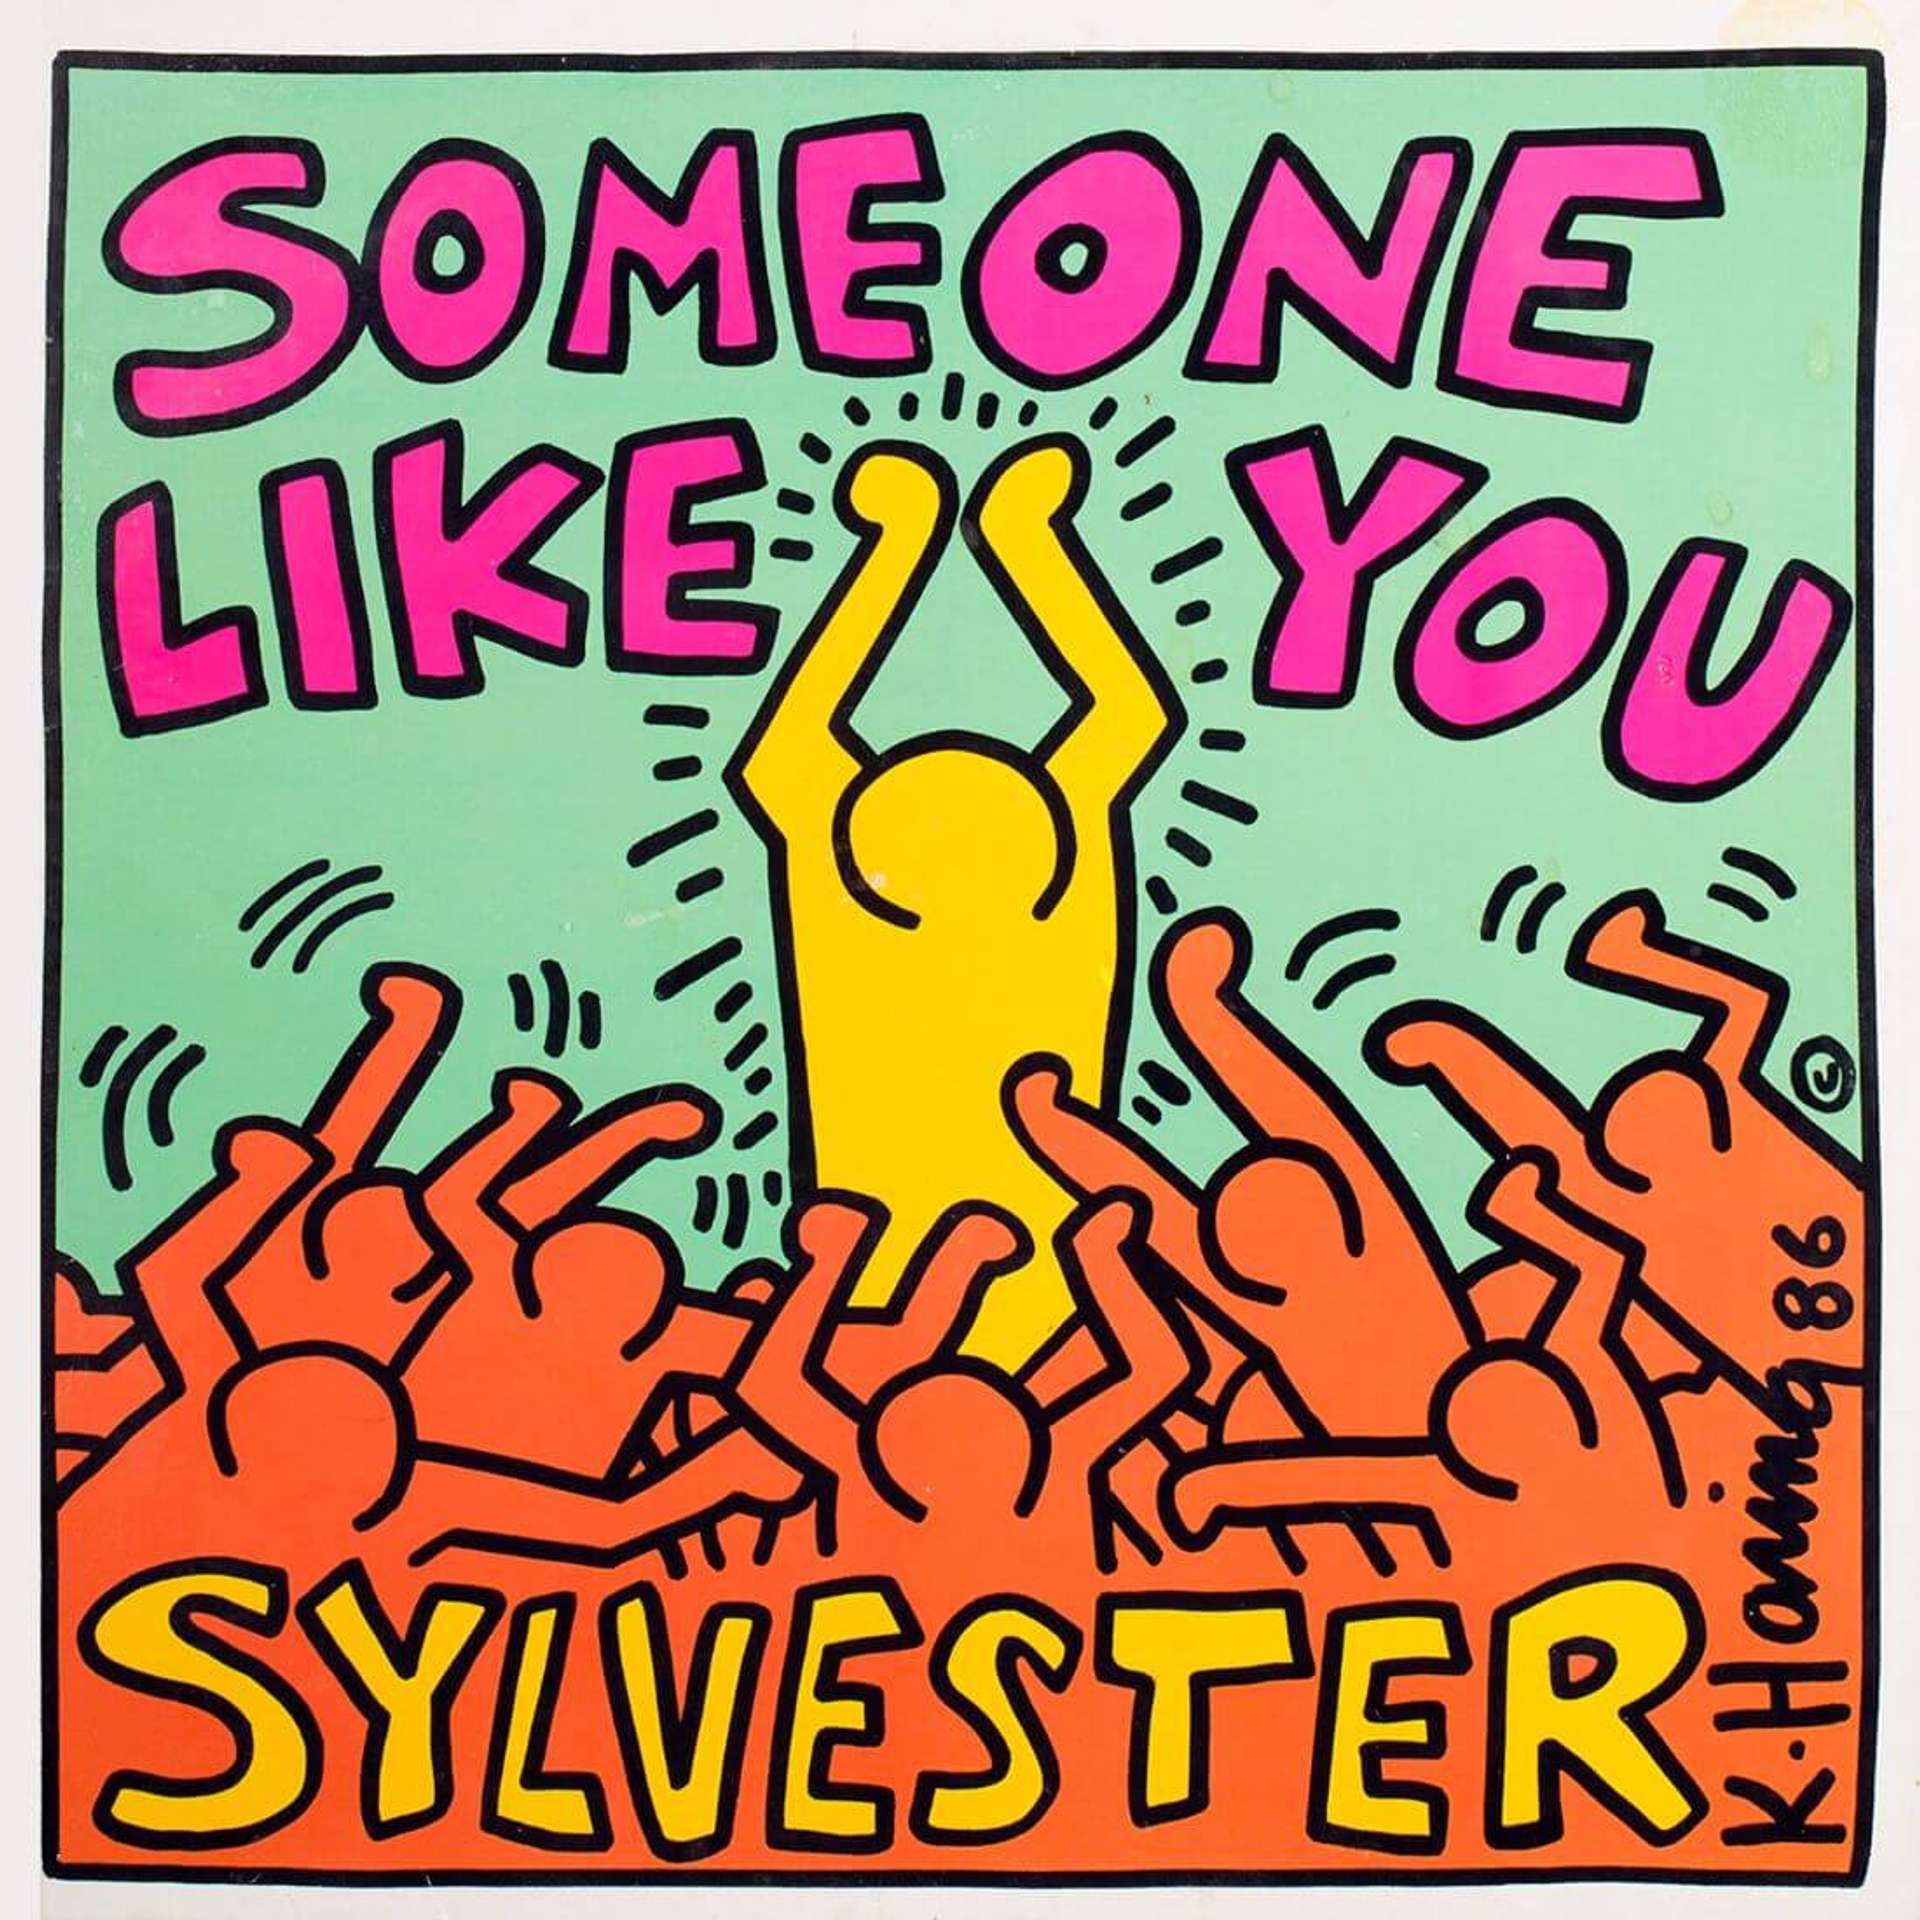 An image of the album cover for Someone Like You, drawn by artist Keith Haring. It depicts a yellow figure standing out among numerous other orange figures against a green background. Above, the song title is done in pink.